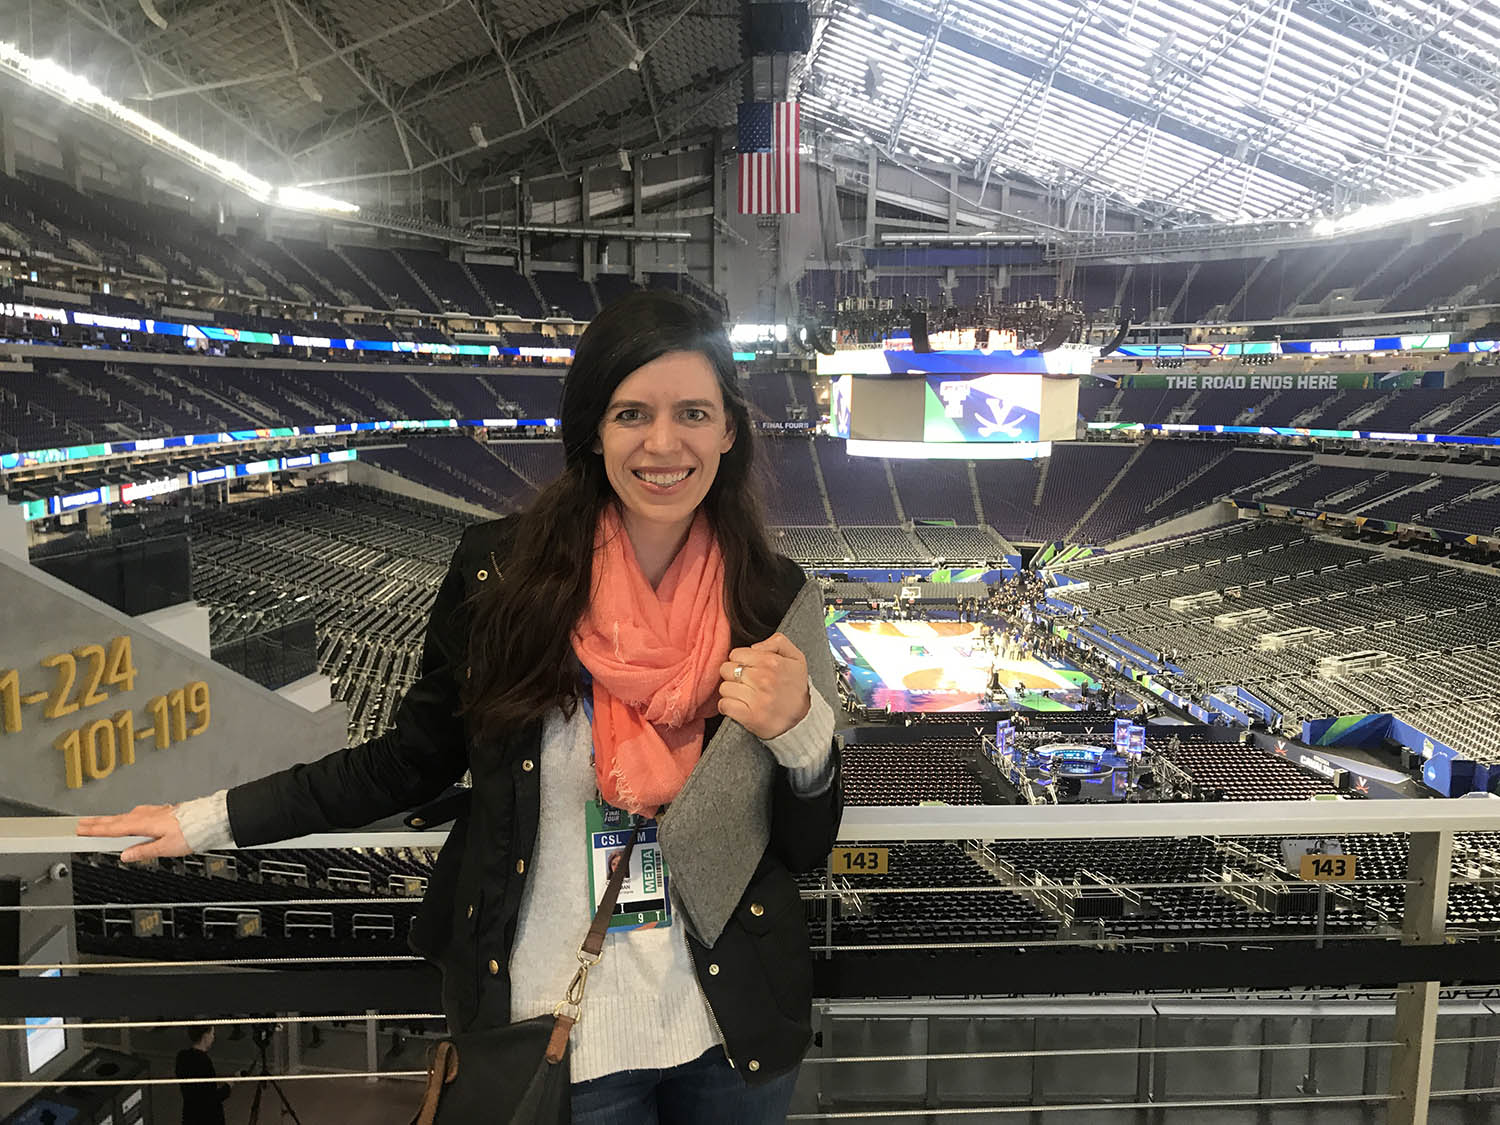 Caroline Newman at the top of the Final four stadium